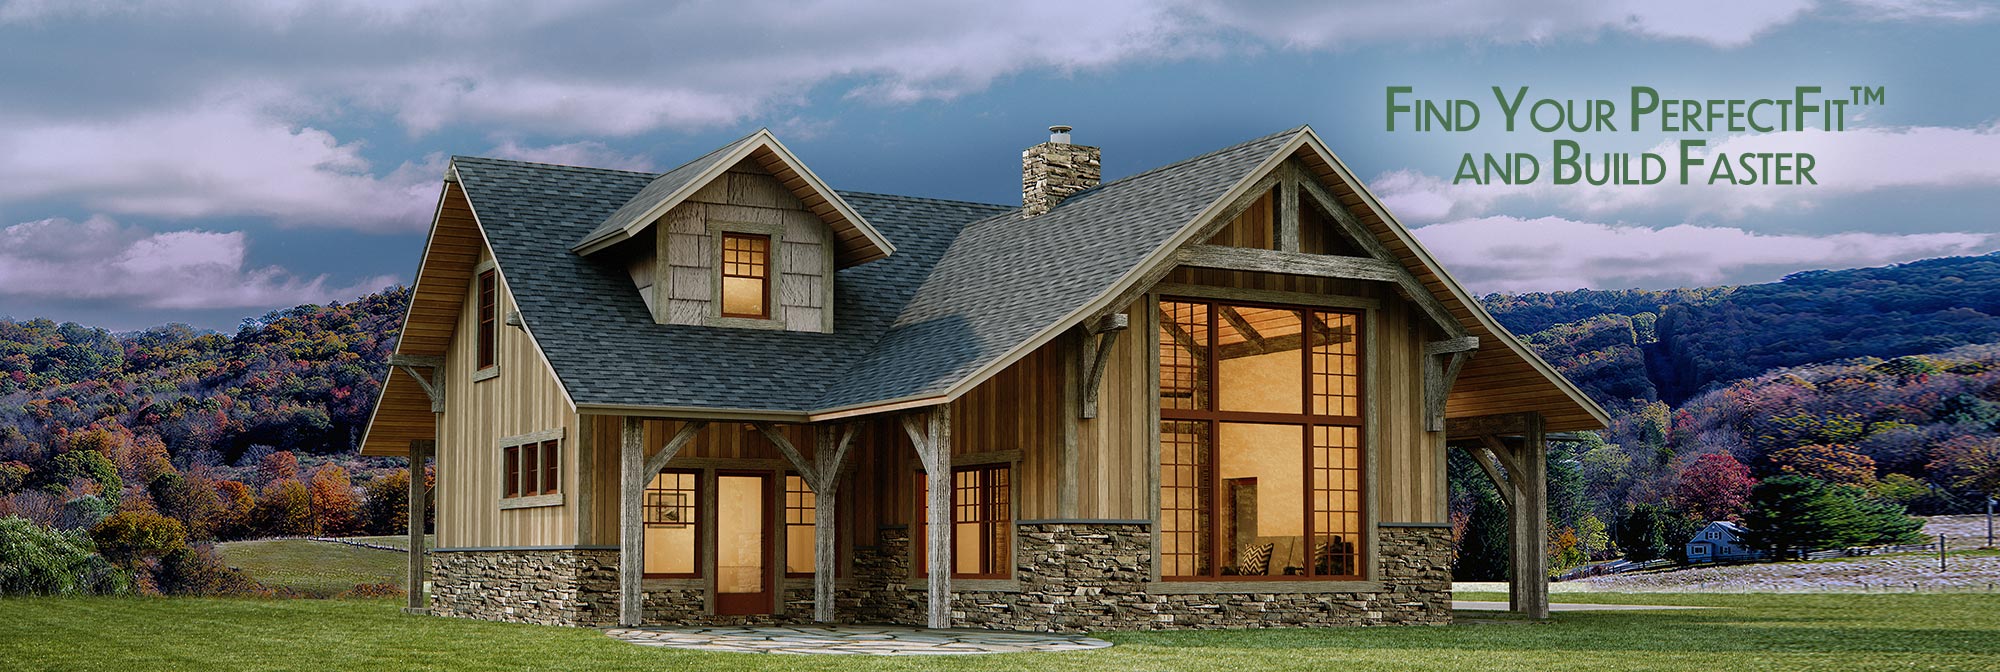 Timber Frame Homes Riverbend Custom, Small Timber Frame House Plans Canada